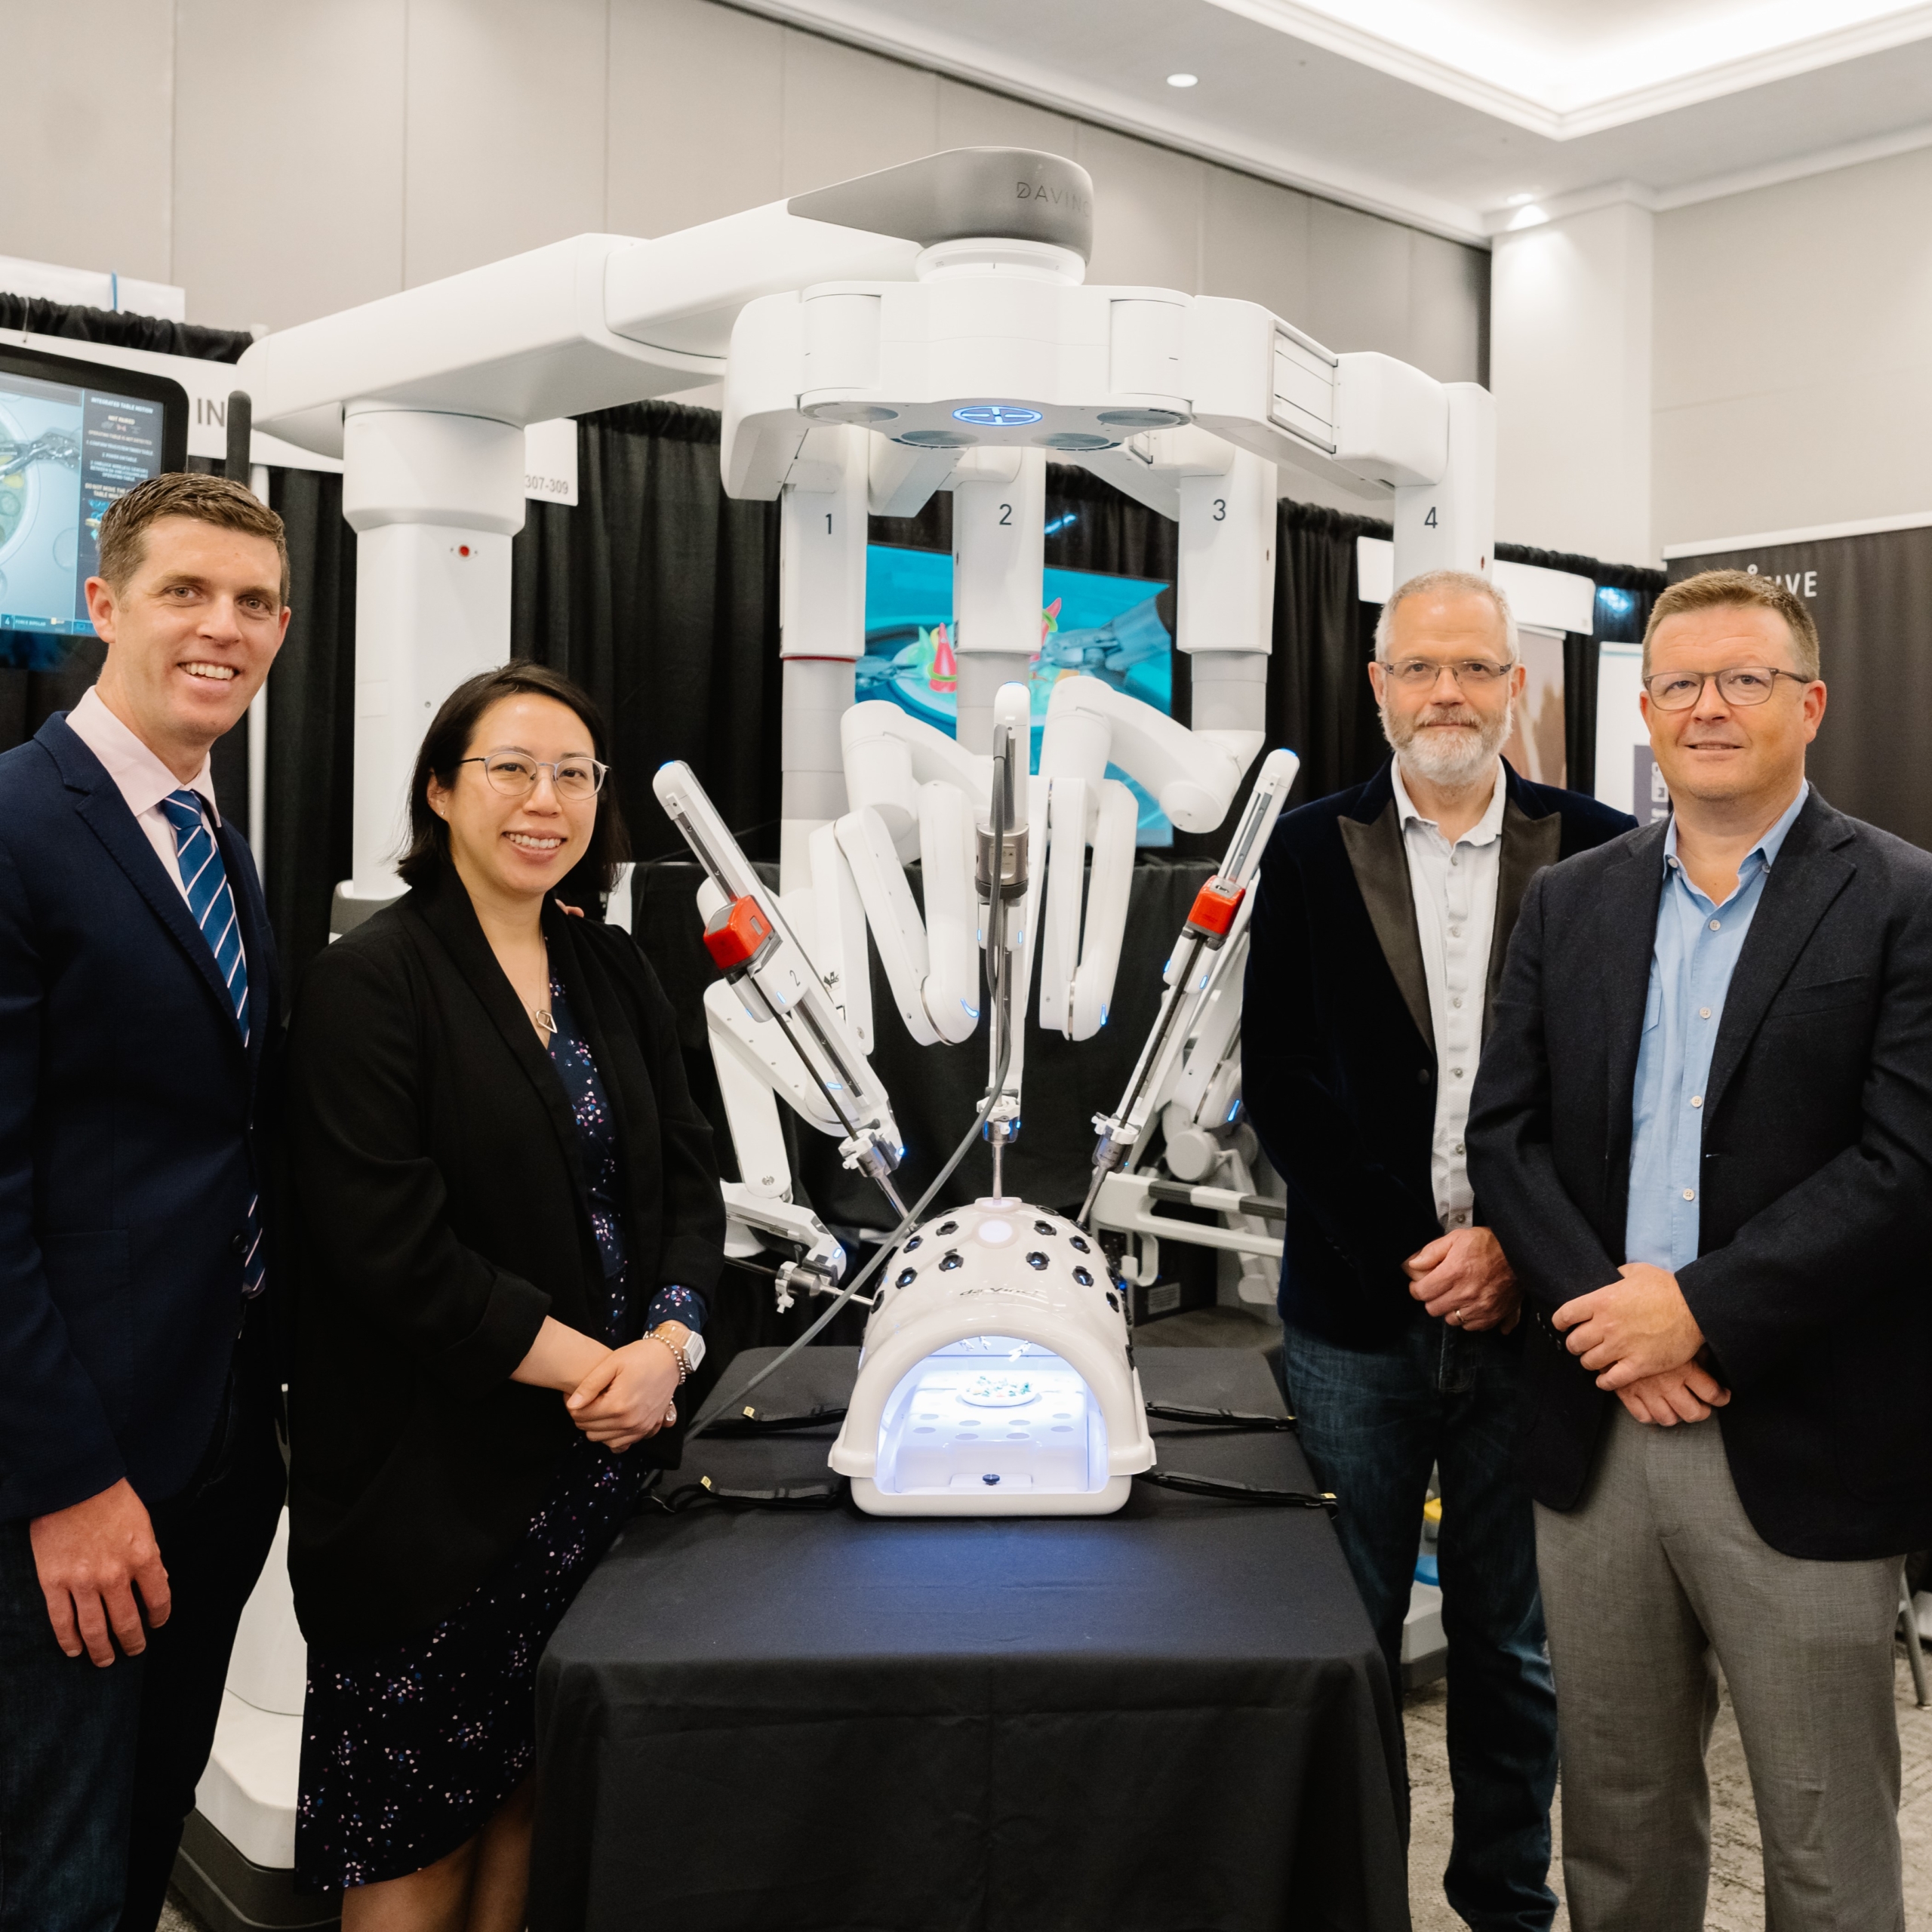 Victoria Surgeons standing with a leading-edge surgical robot